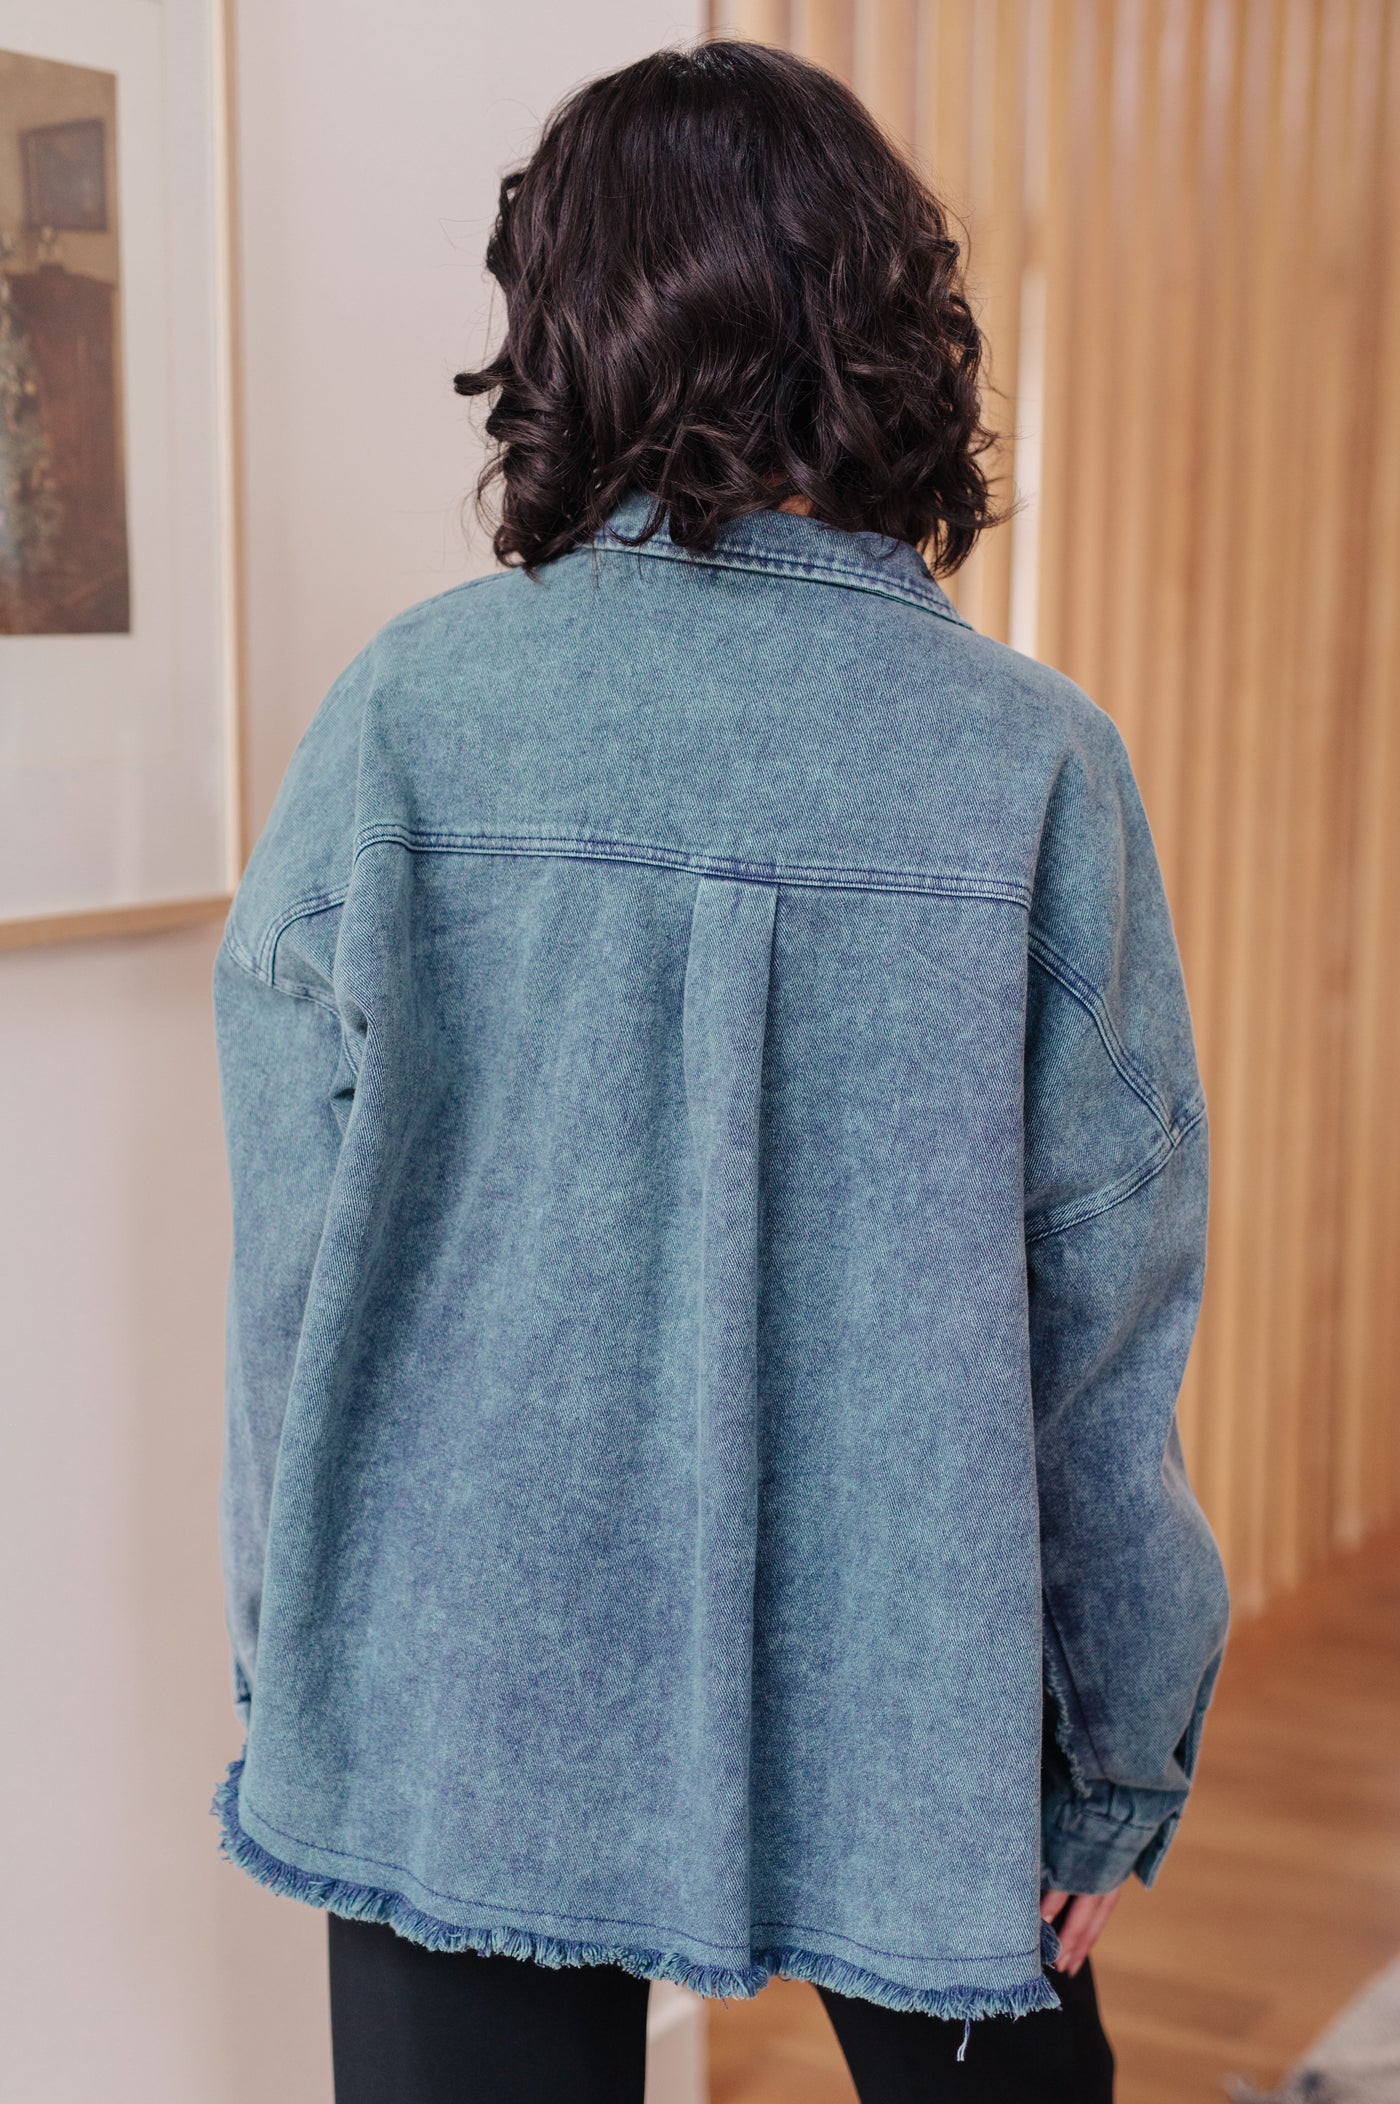 Introducing the Just In Case Mineral Wash Shacket! Made with mineral wash denim twill, this shacket features a raw hem, front pocket, and button front.